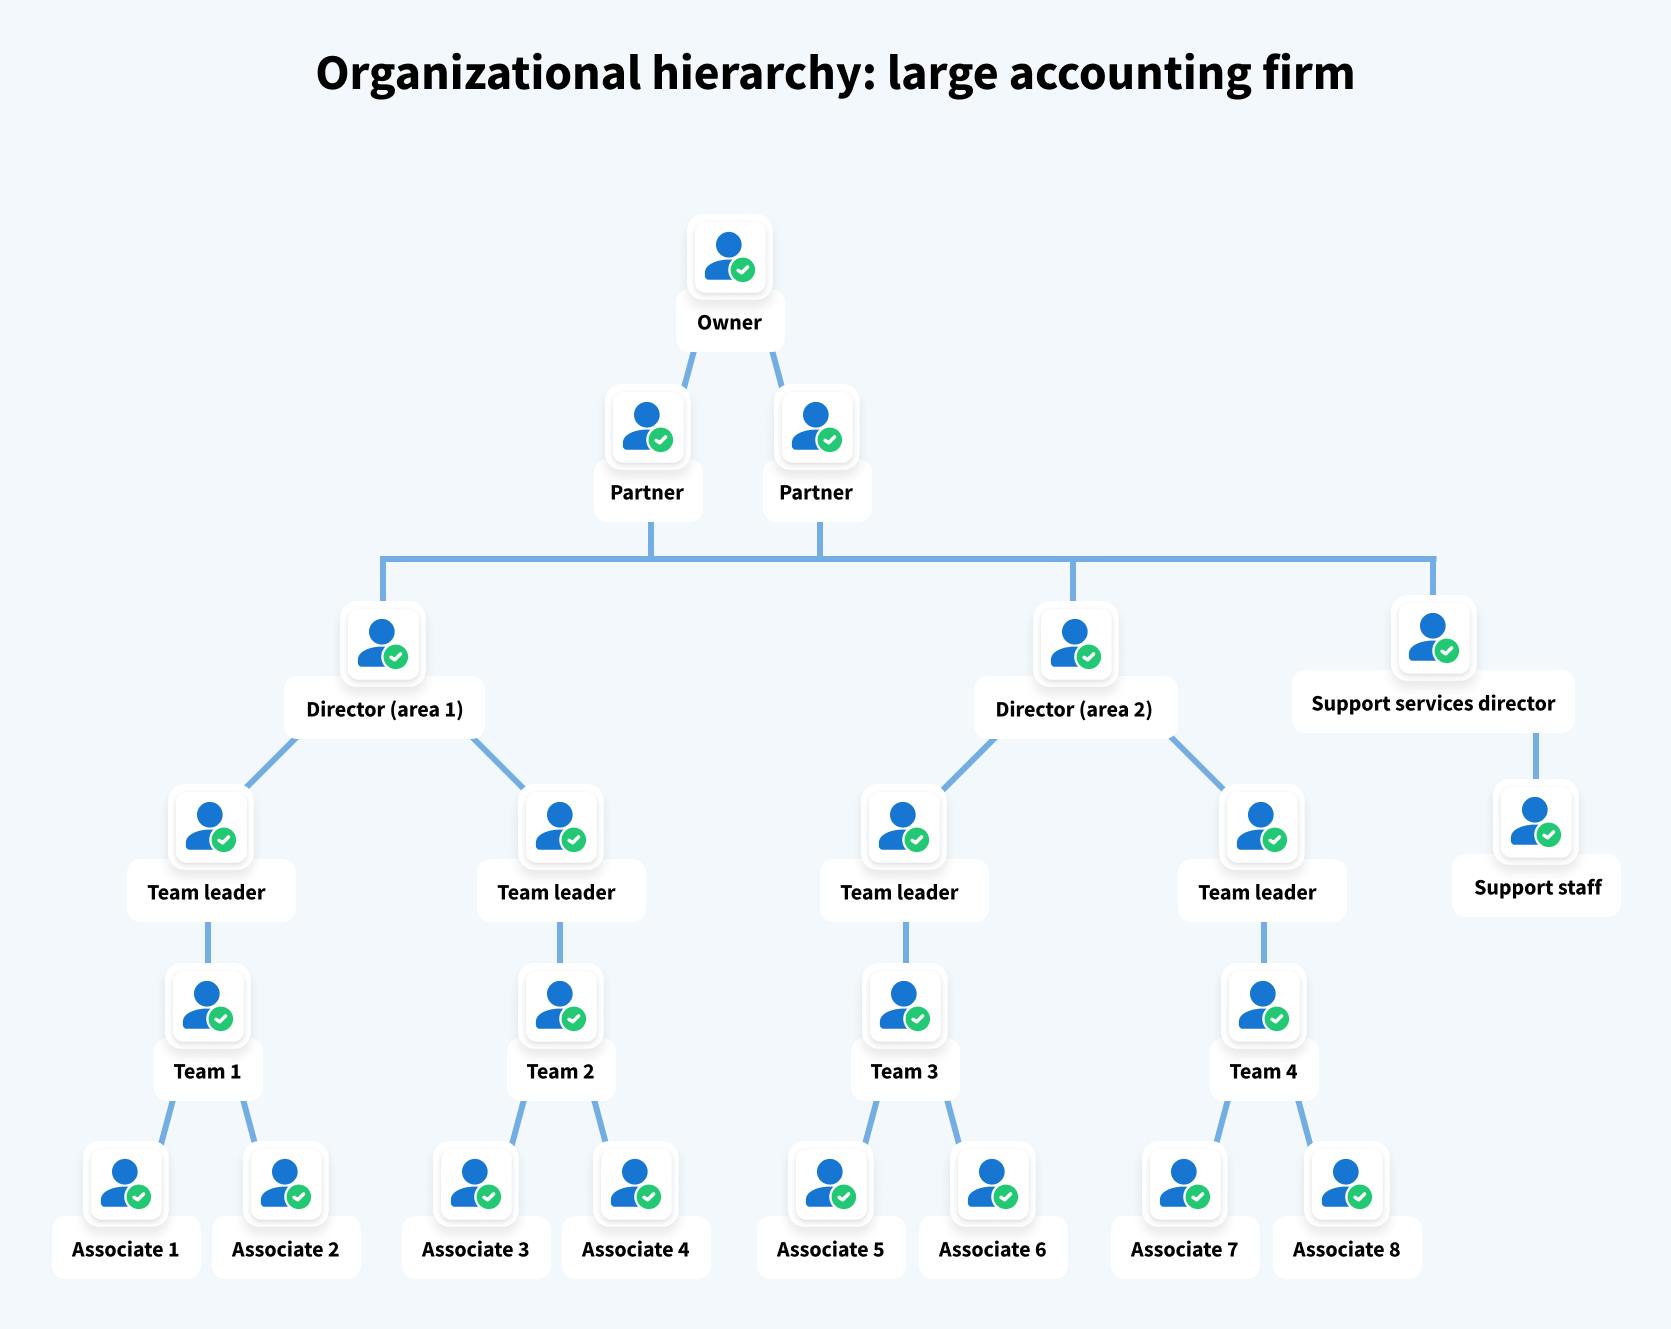 Chart illustrating the organizational hierarchy and roles in a large accounting firm.